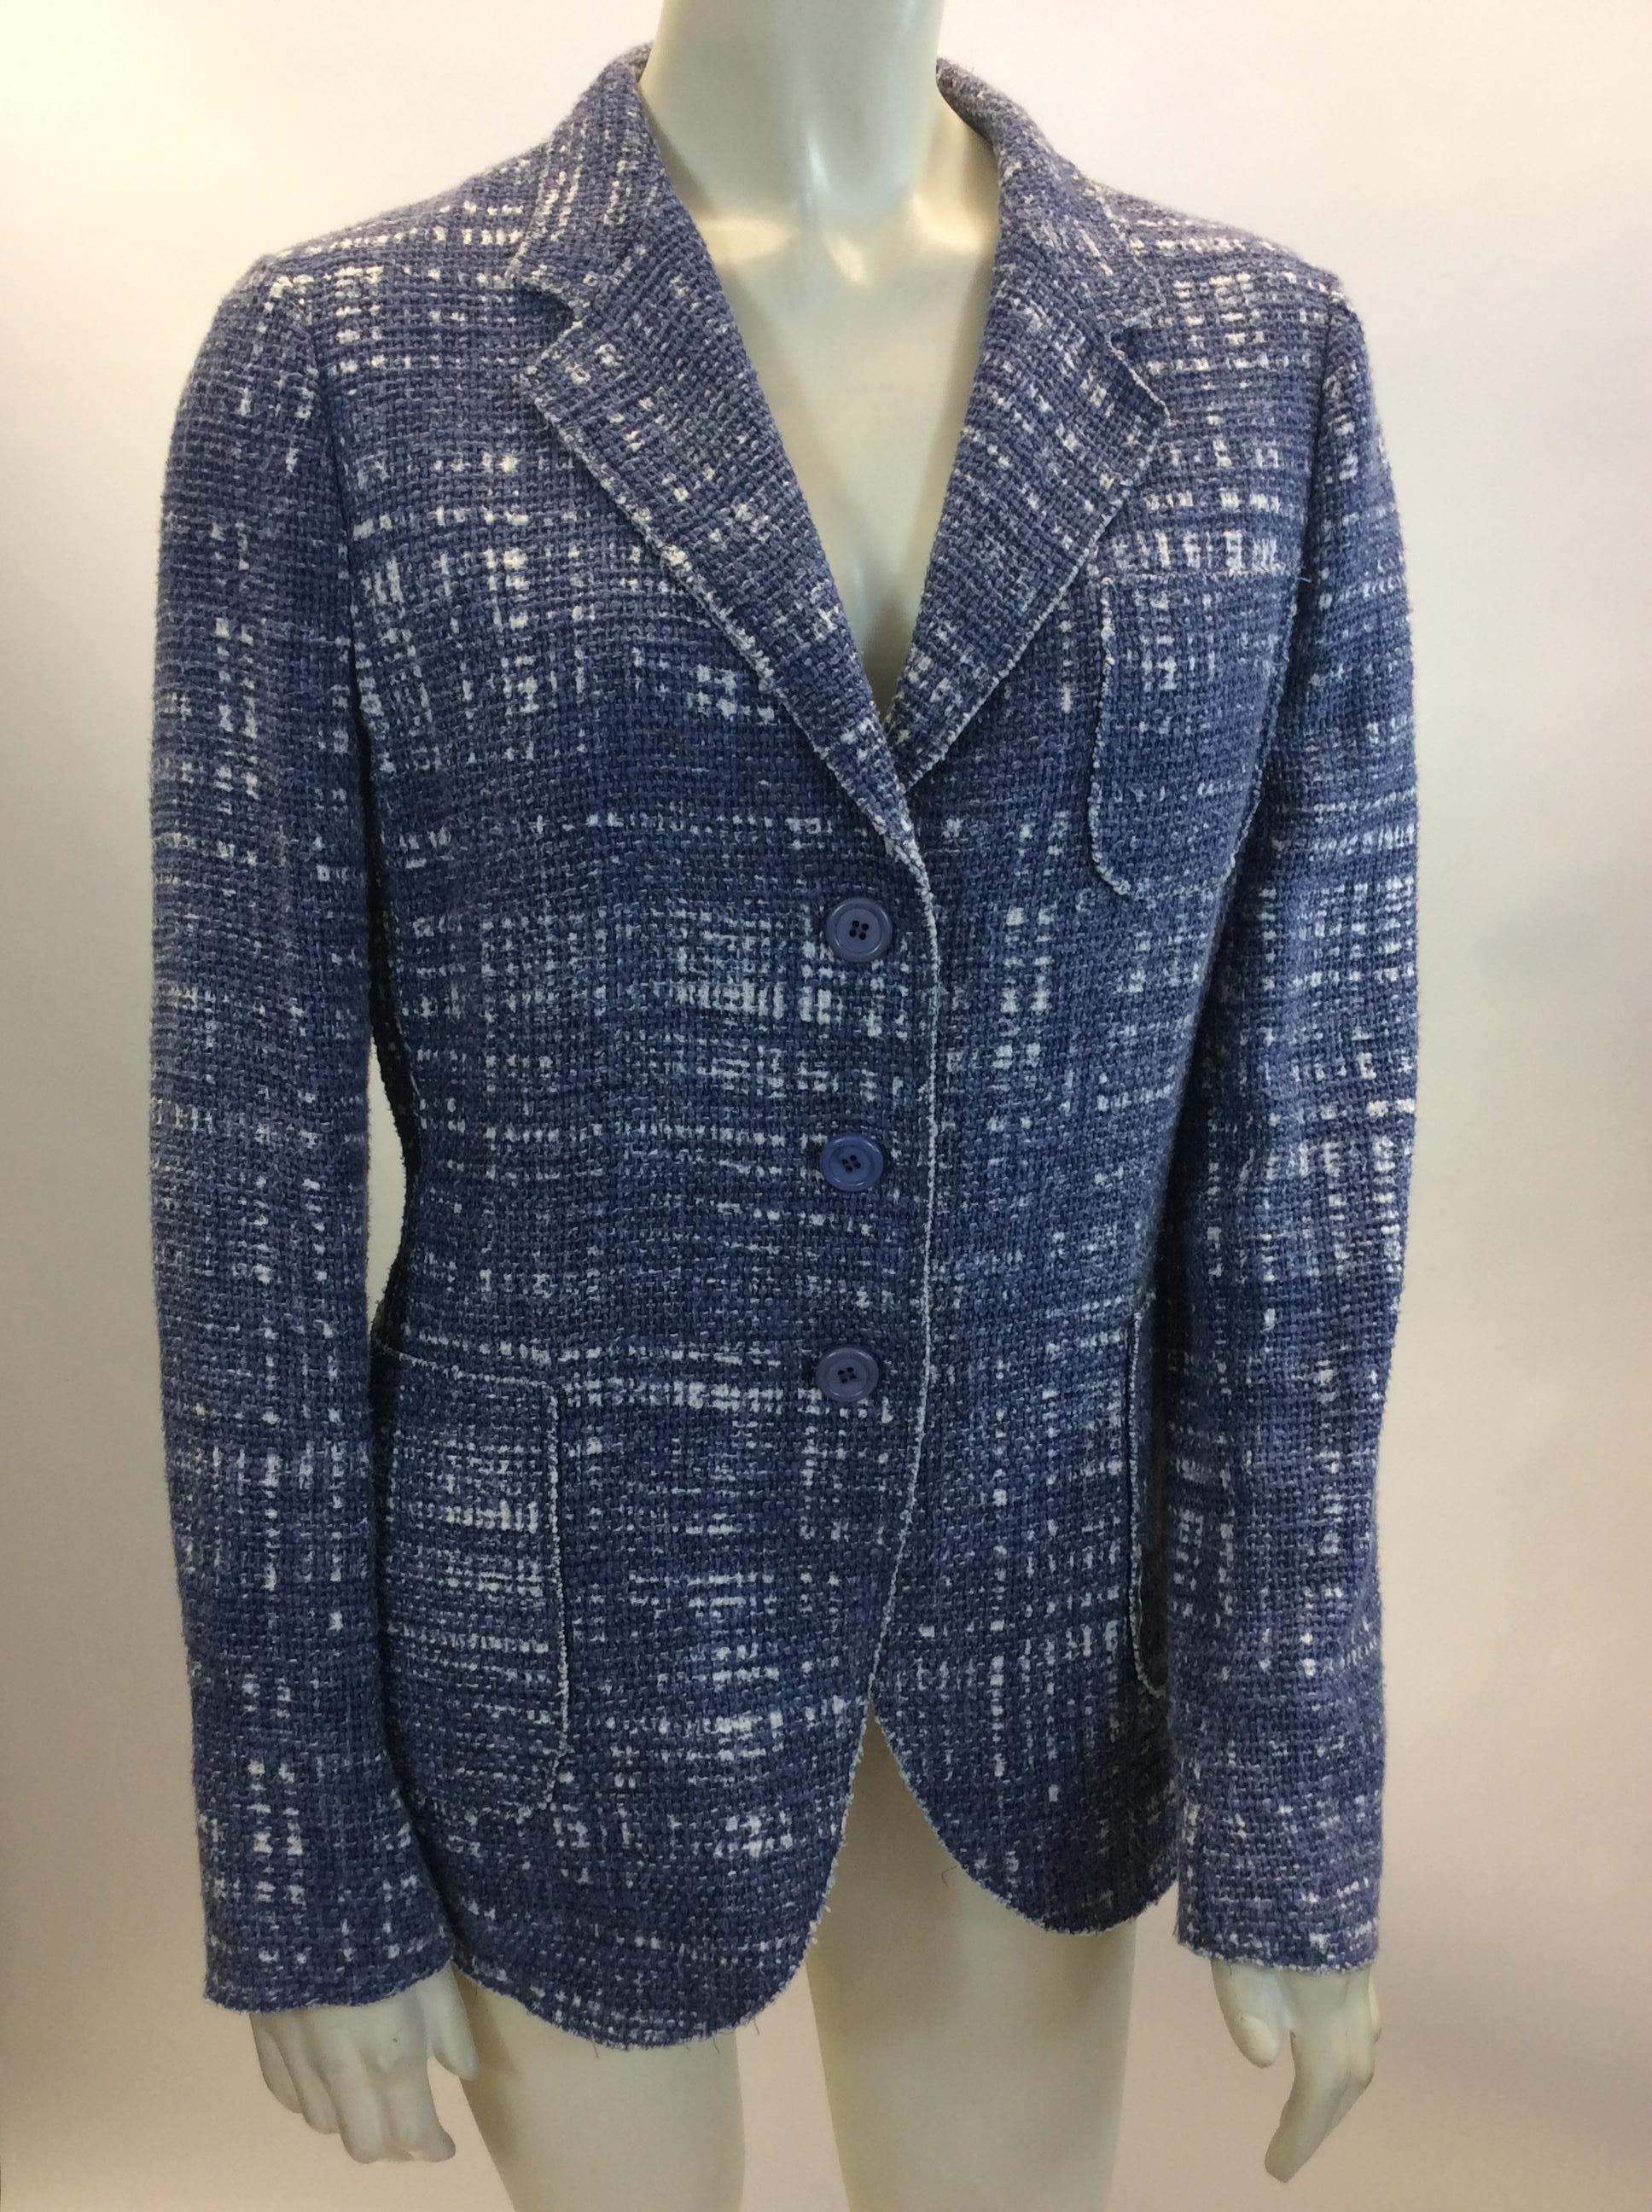 Prada Blue and White Tweed Jacket
$399
Made in Romania
60% Cotton, 34% Linen, 6% Viscose
Size 46
Length 27